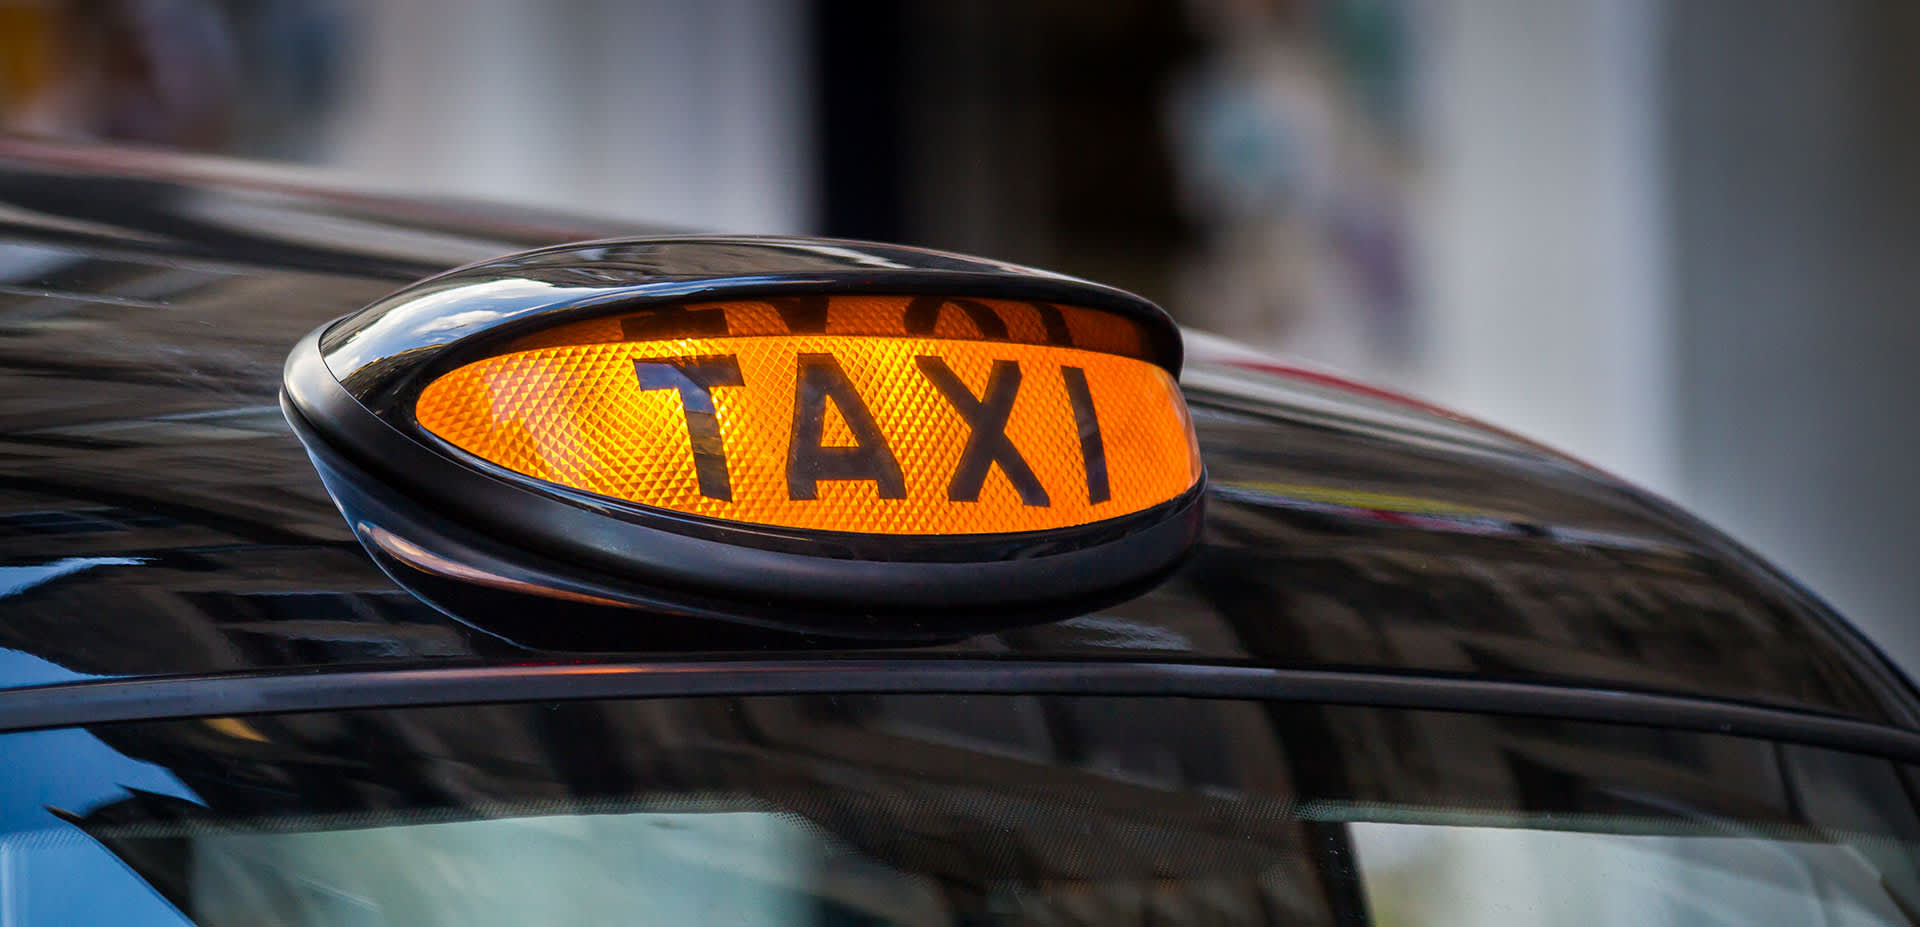 Lit up taxi sign on top of a black cab